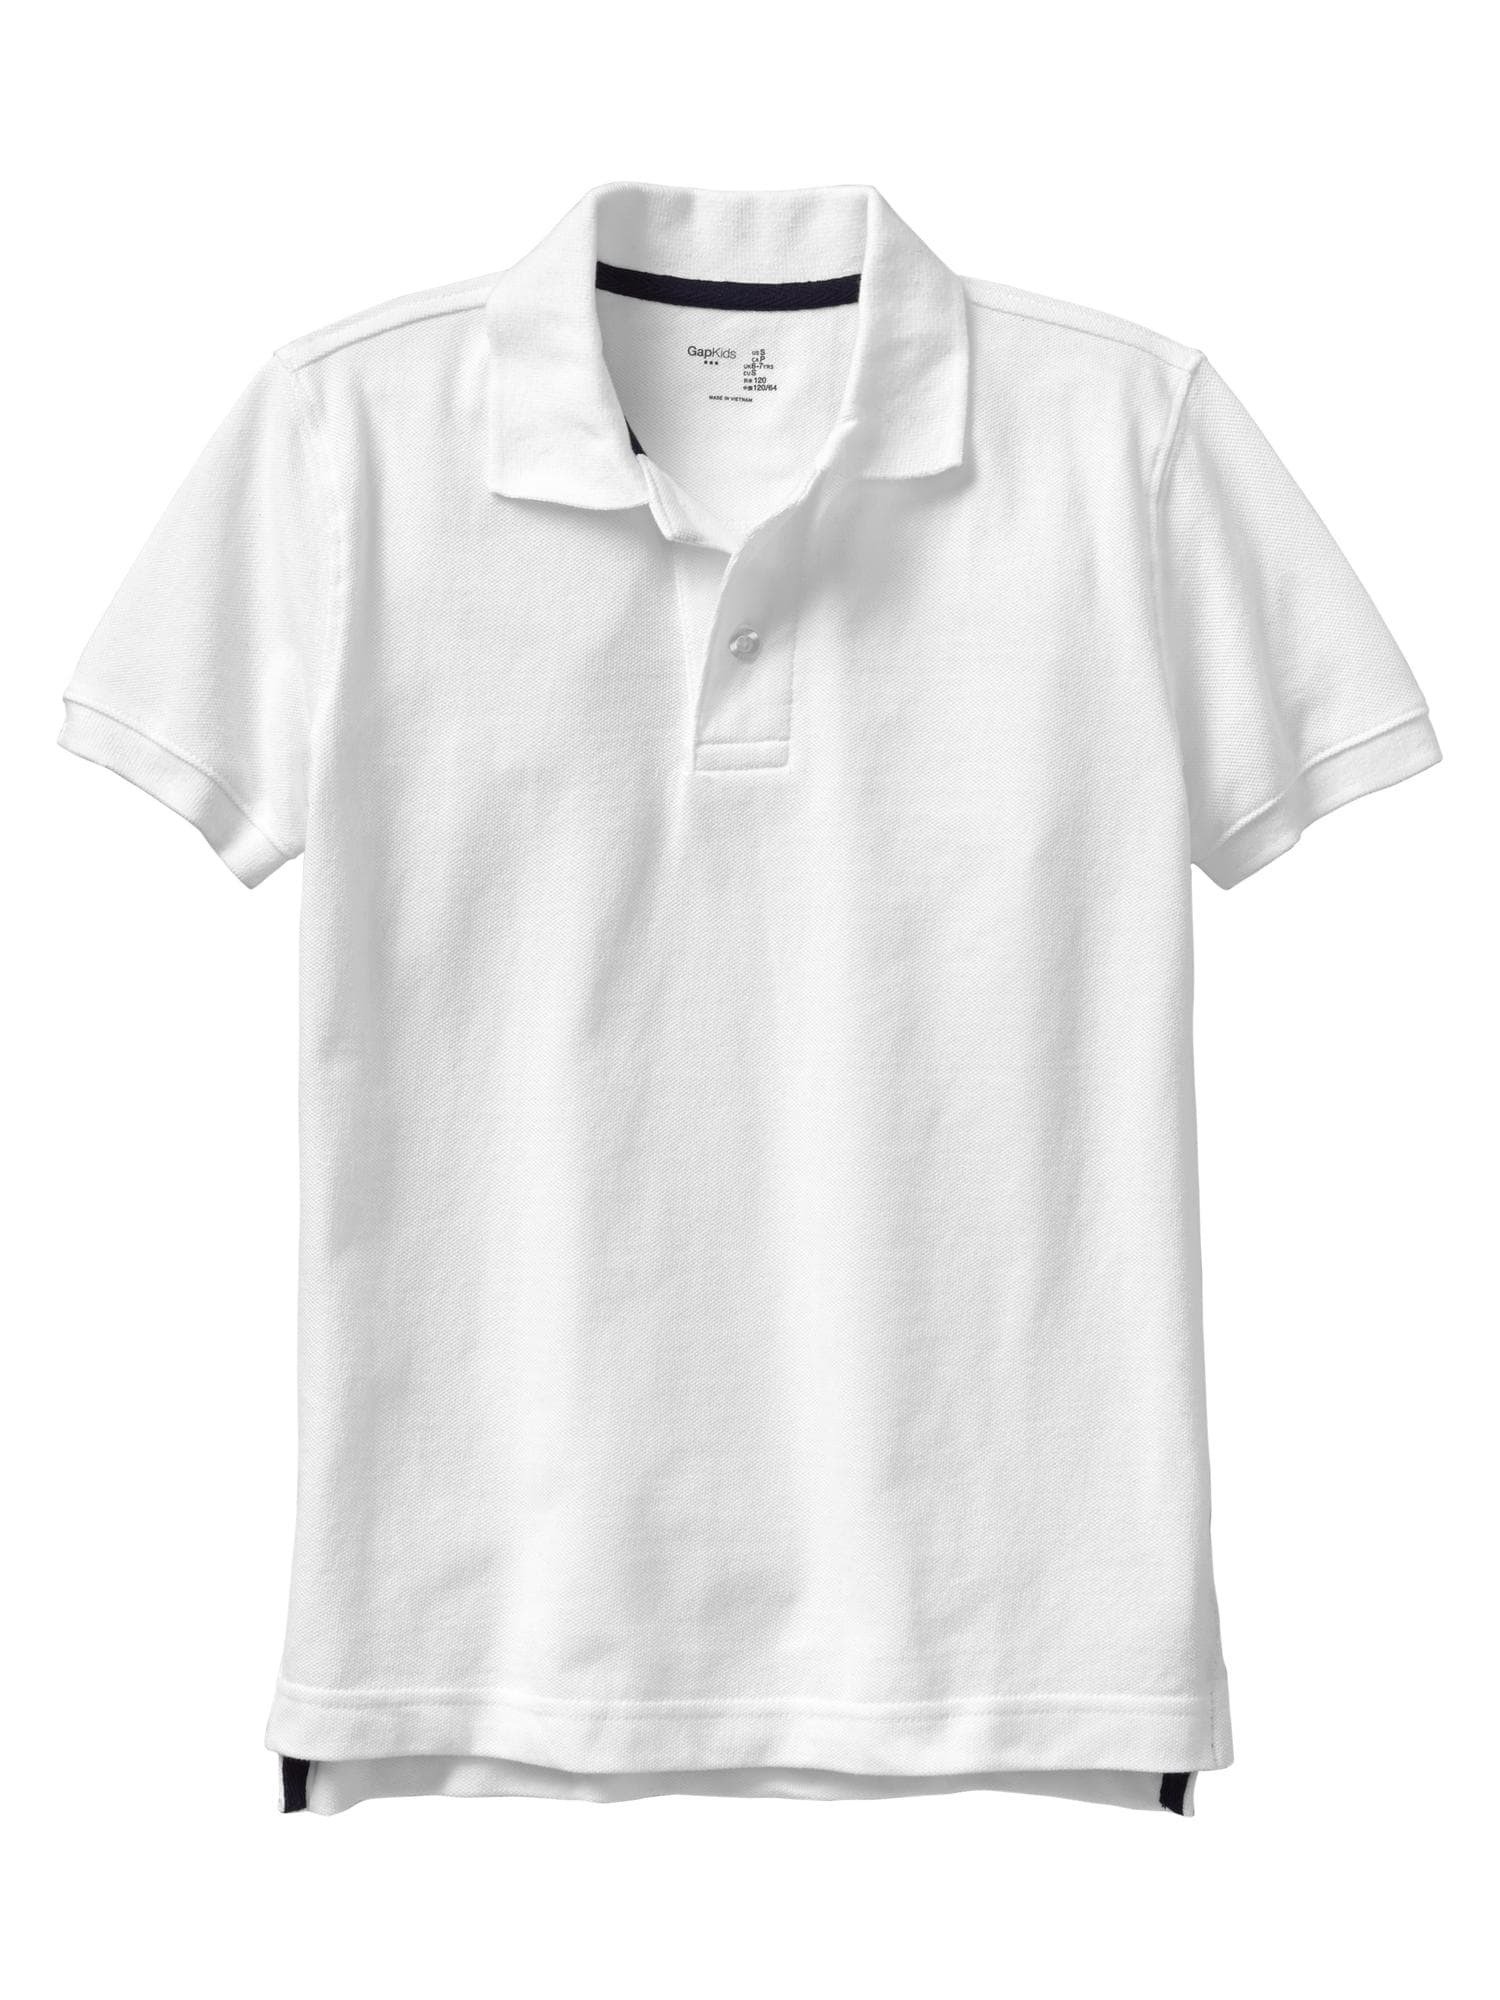 Polo t-shirt product image